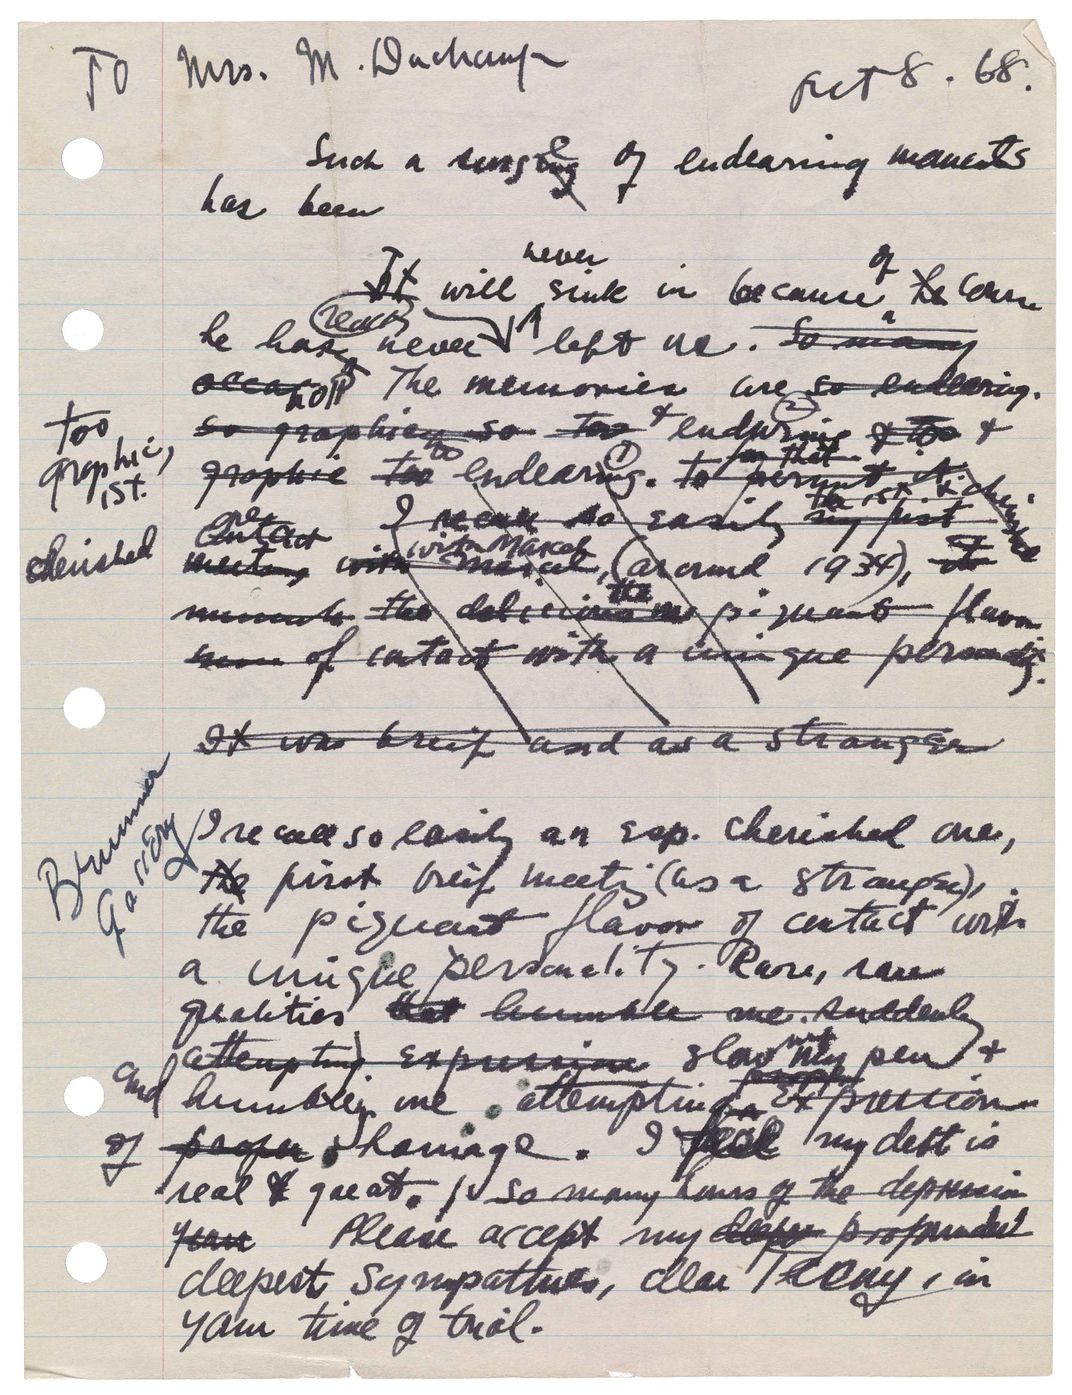 These Letters Written by Famous Artists Reveal the Lost Intimacy